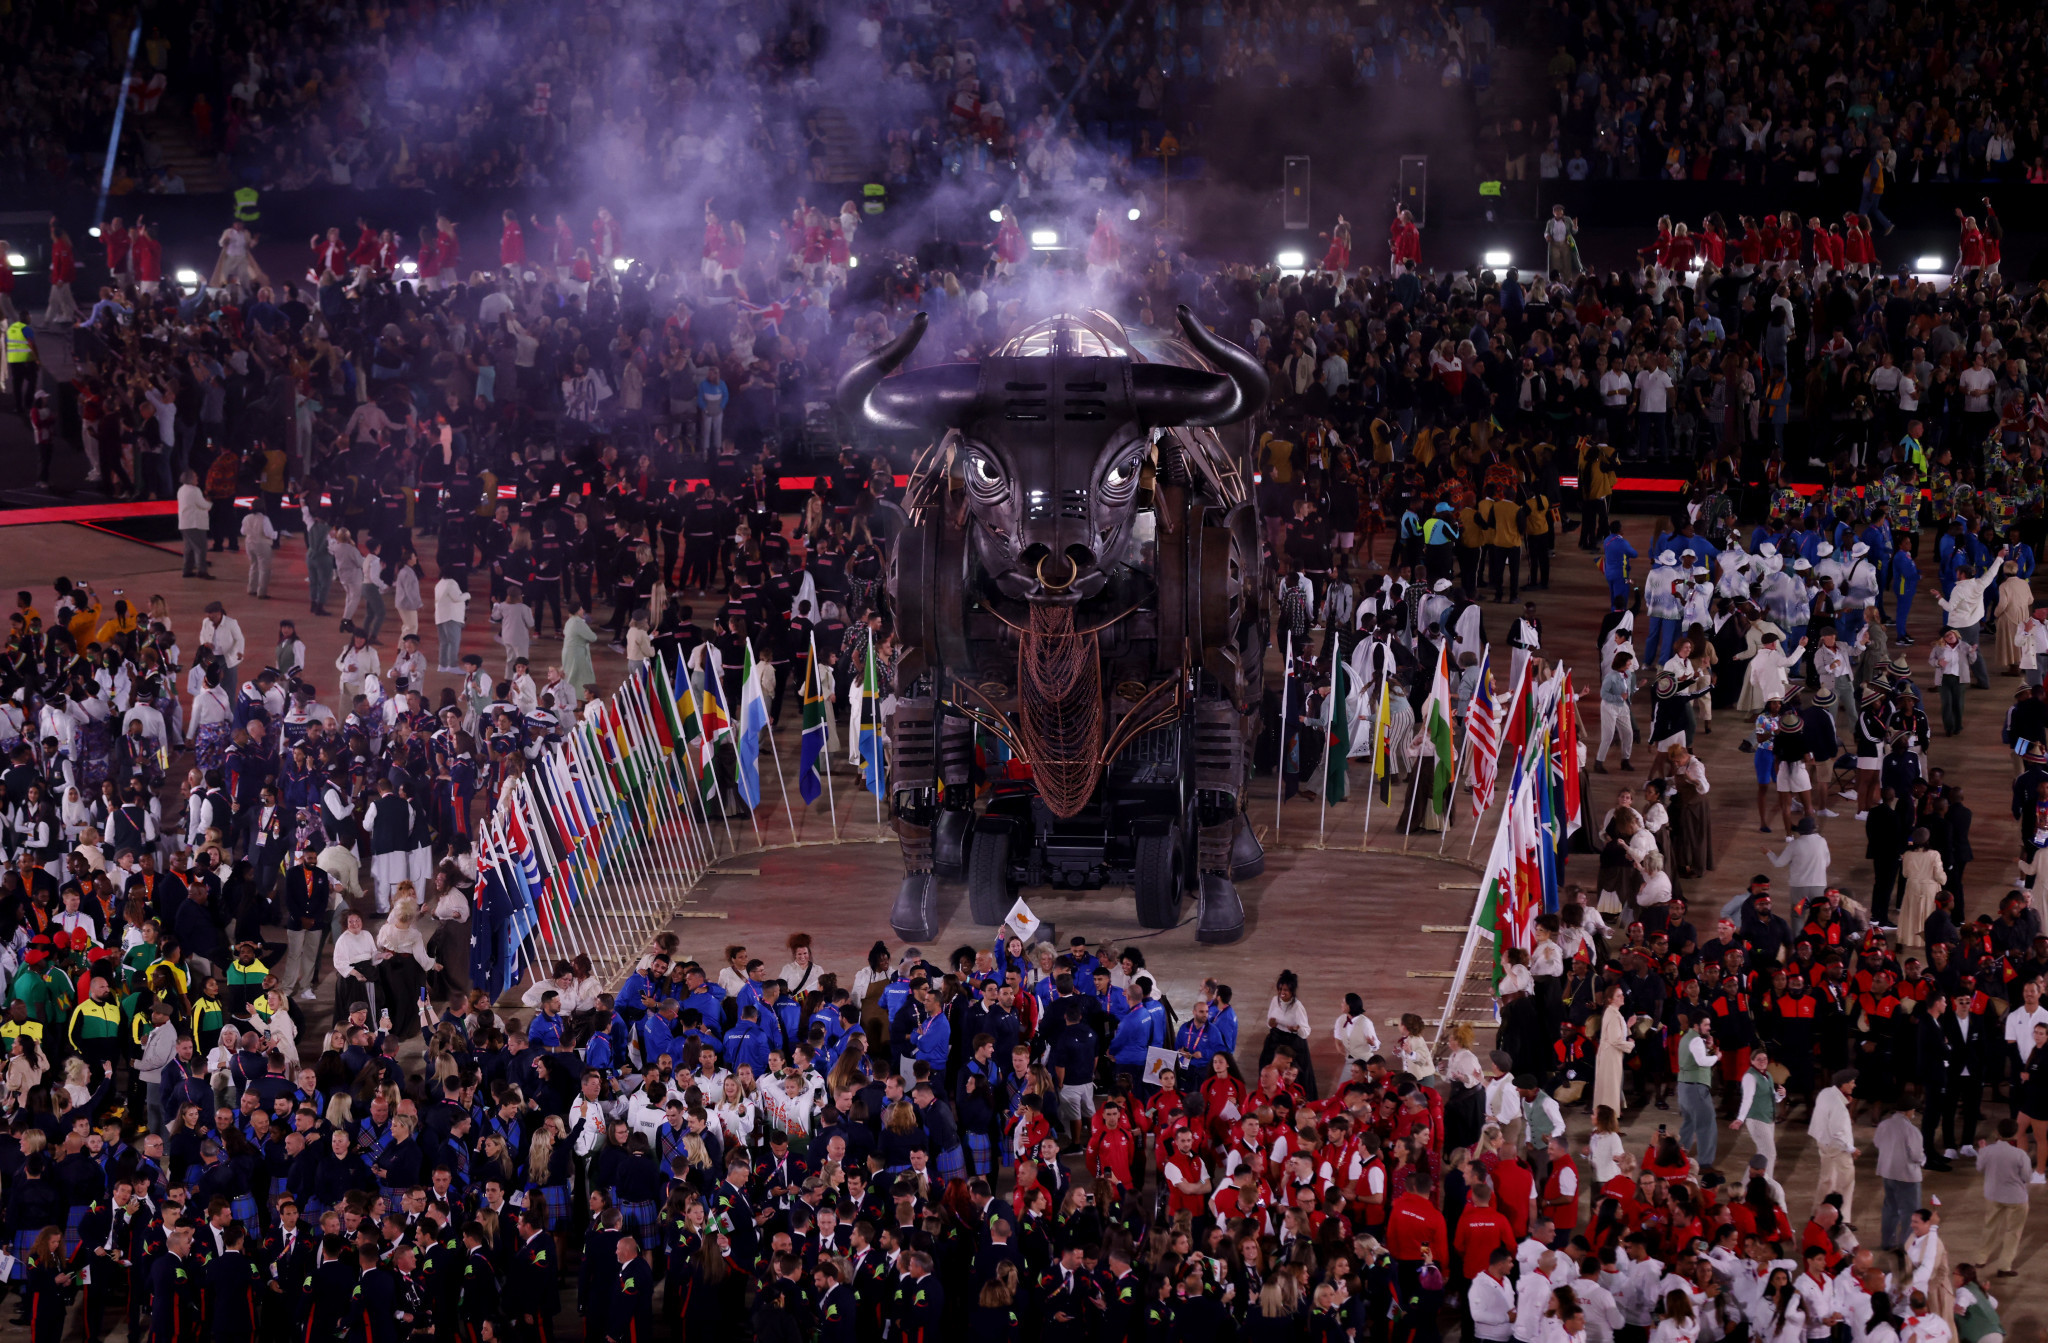 The Raging Bull was the unexpected hit of the Birmingham 2022 Opening Ceremony ©Getty Images